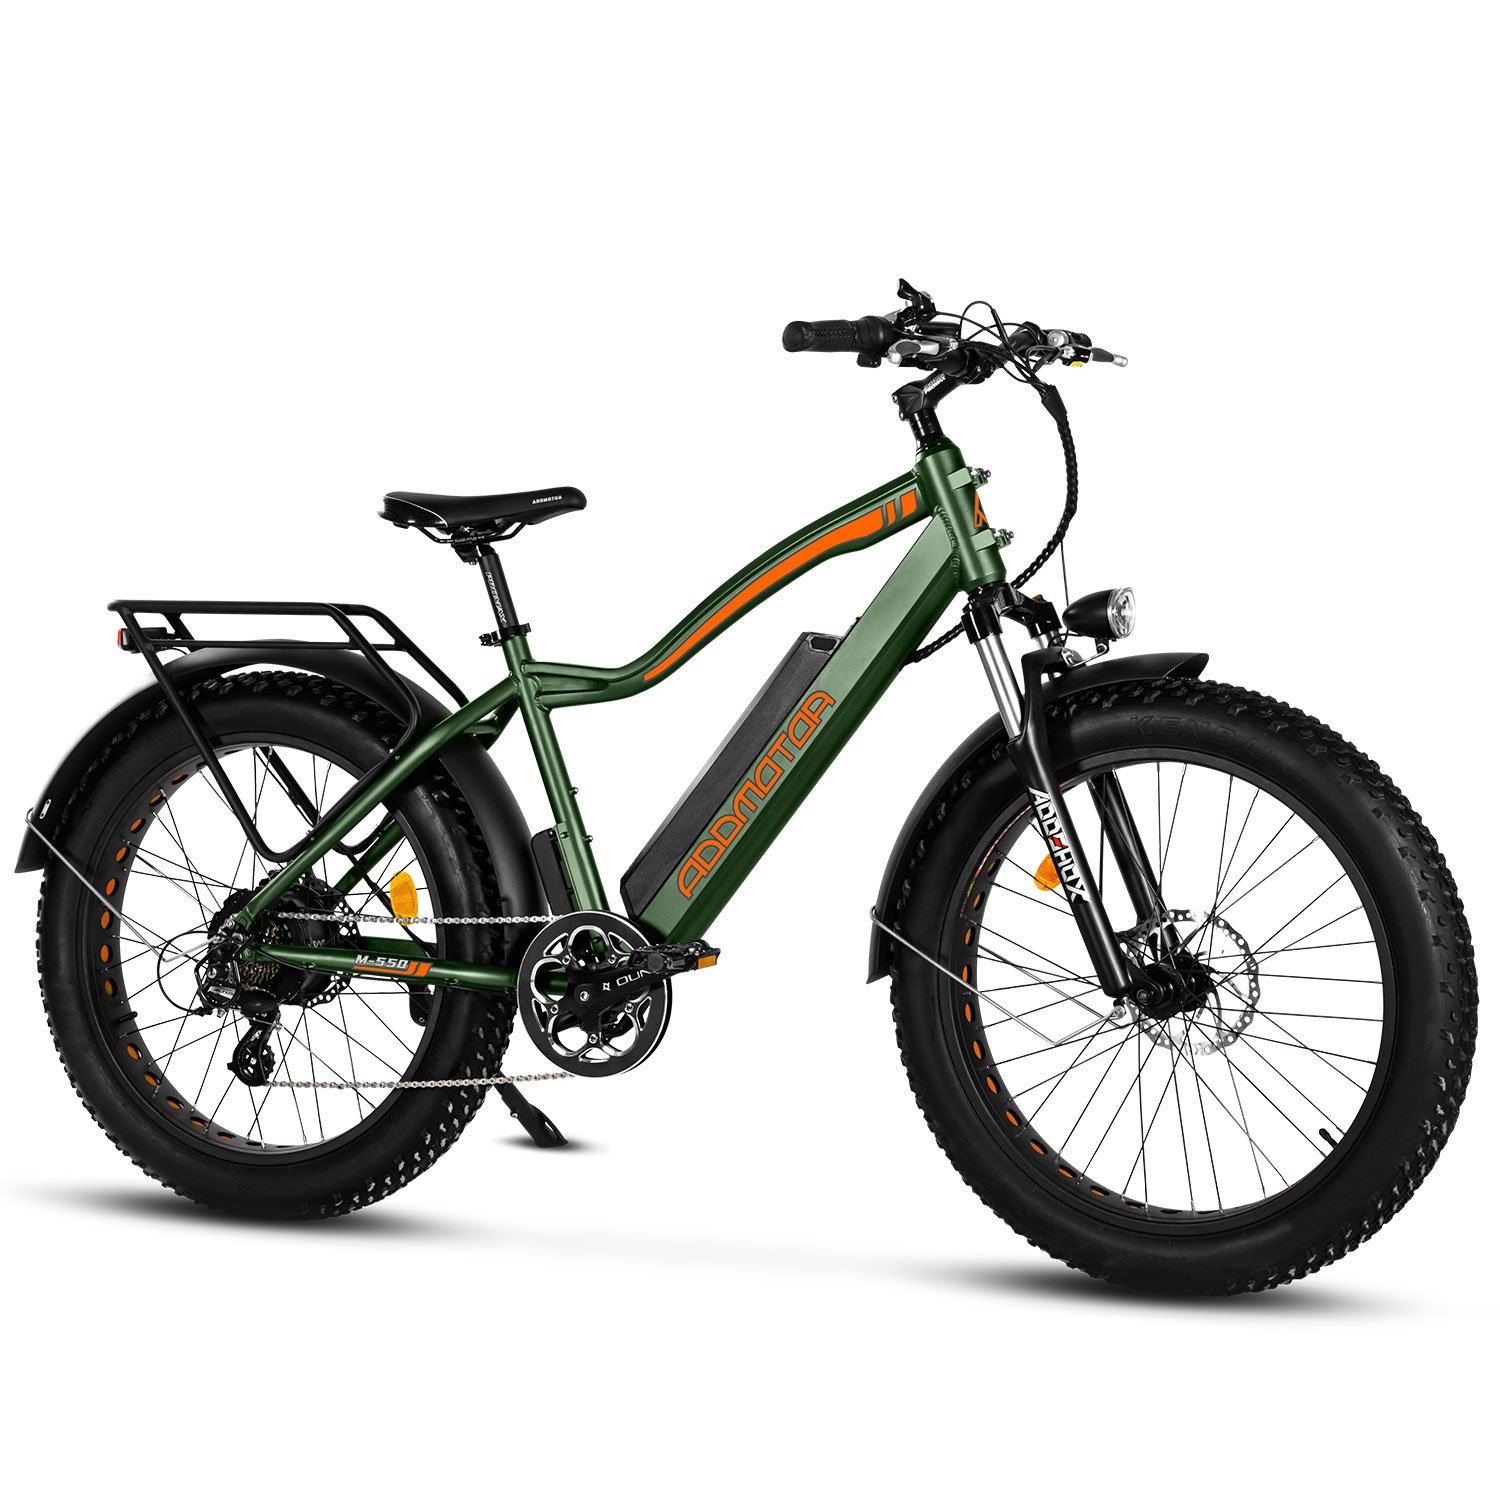 Addmotor M-550 P7 - Electric Bikes for Sale